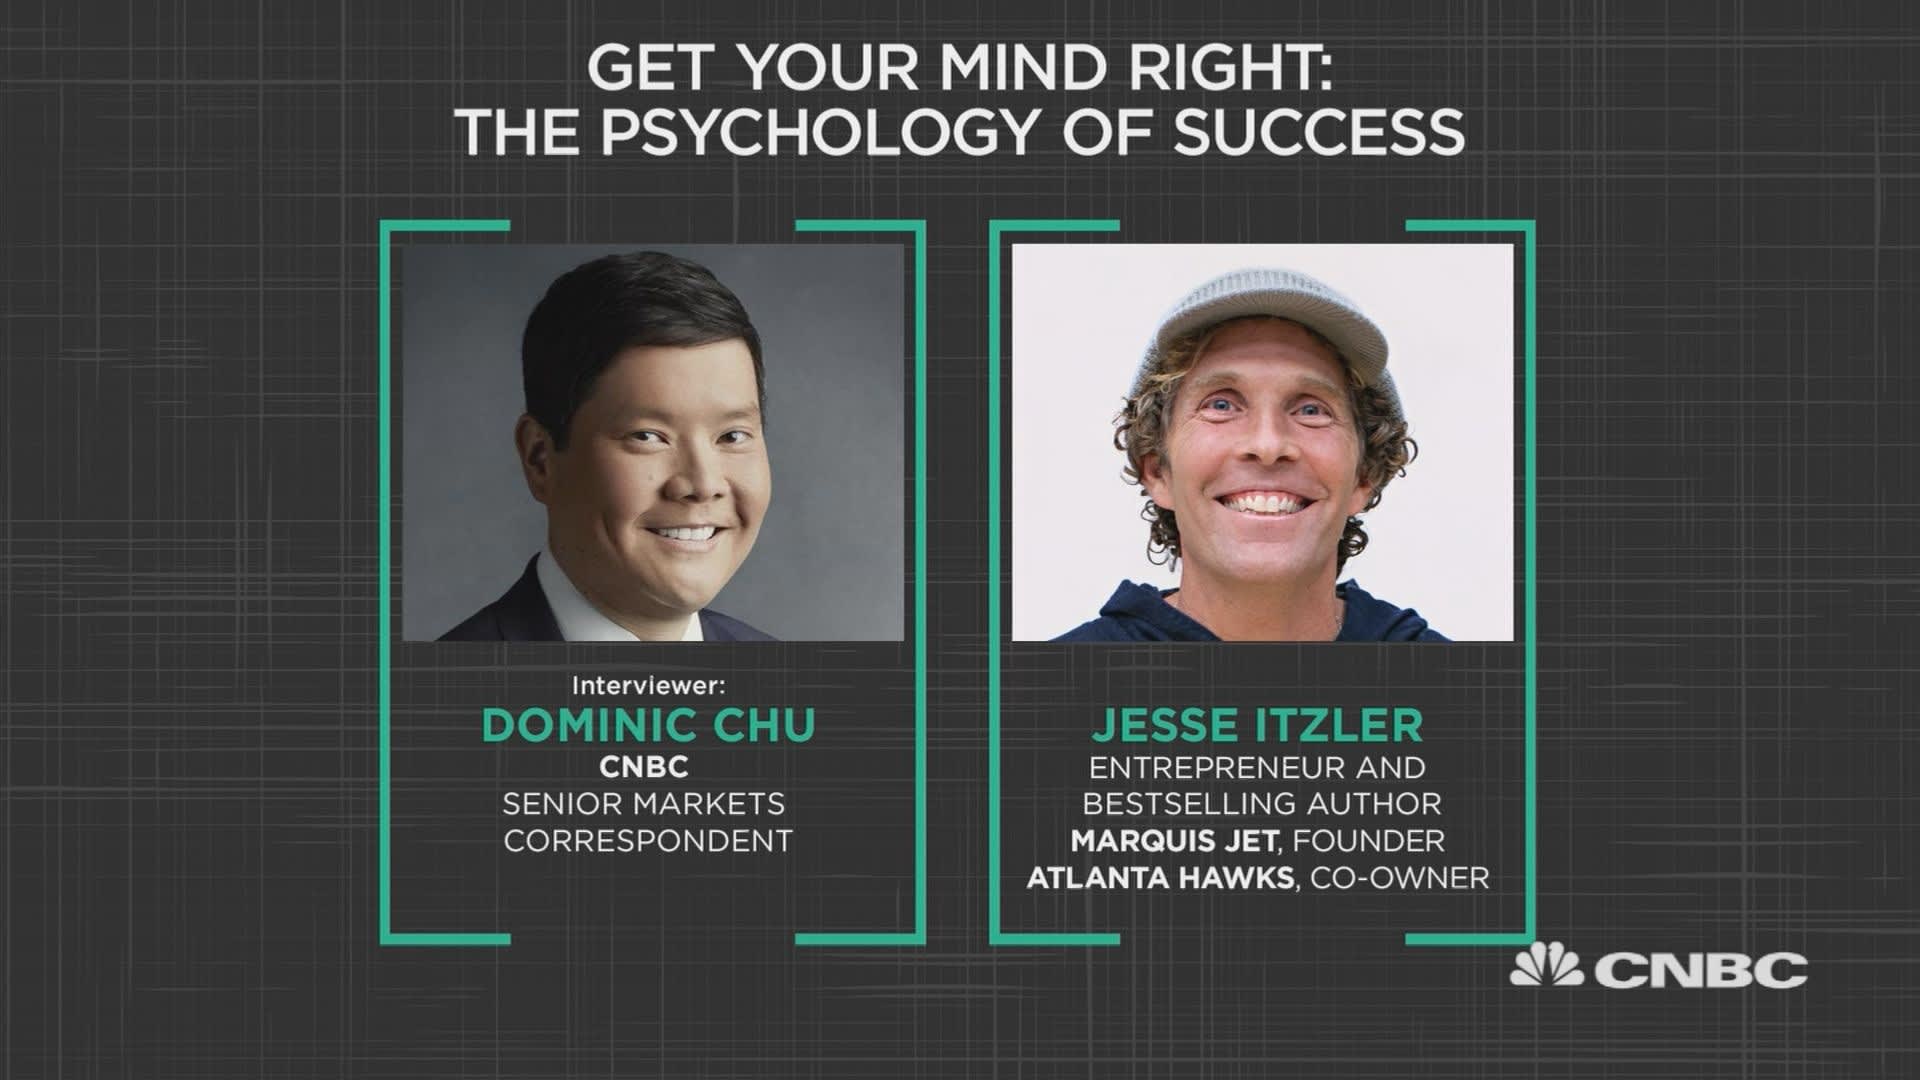 Entrepreneur Jesse Itzler believes this is the 'psychology of